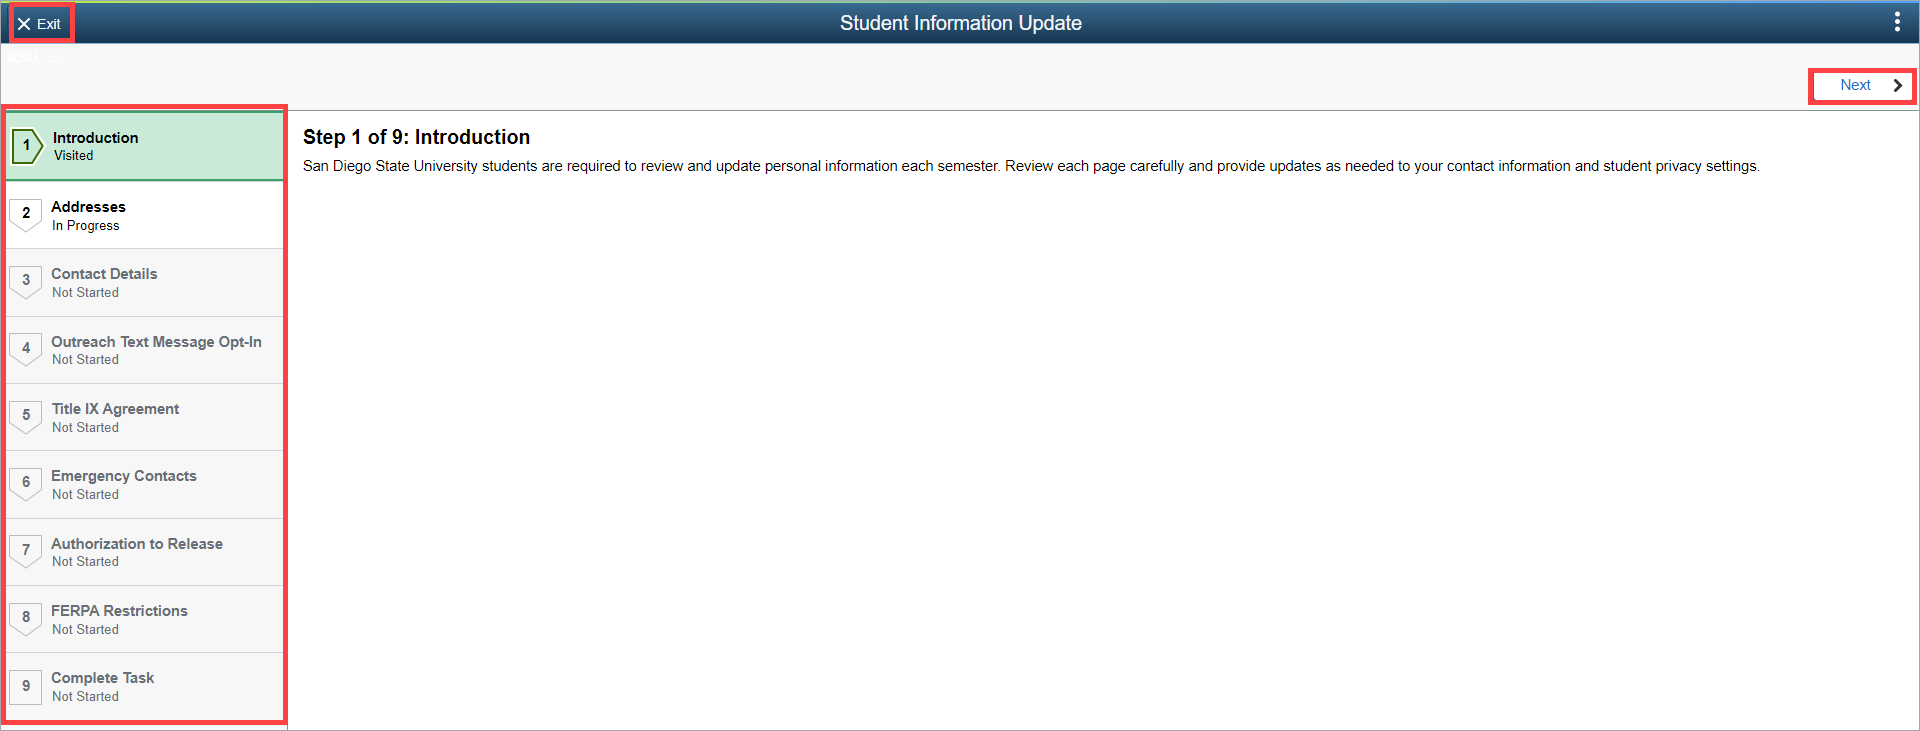 Student Information Update page